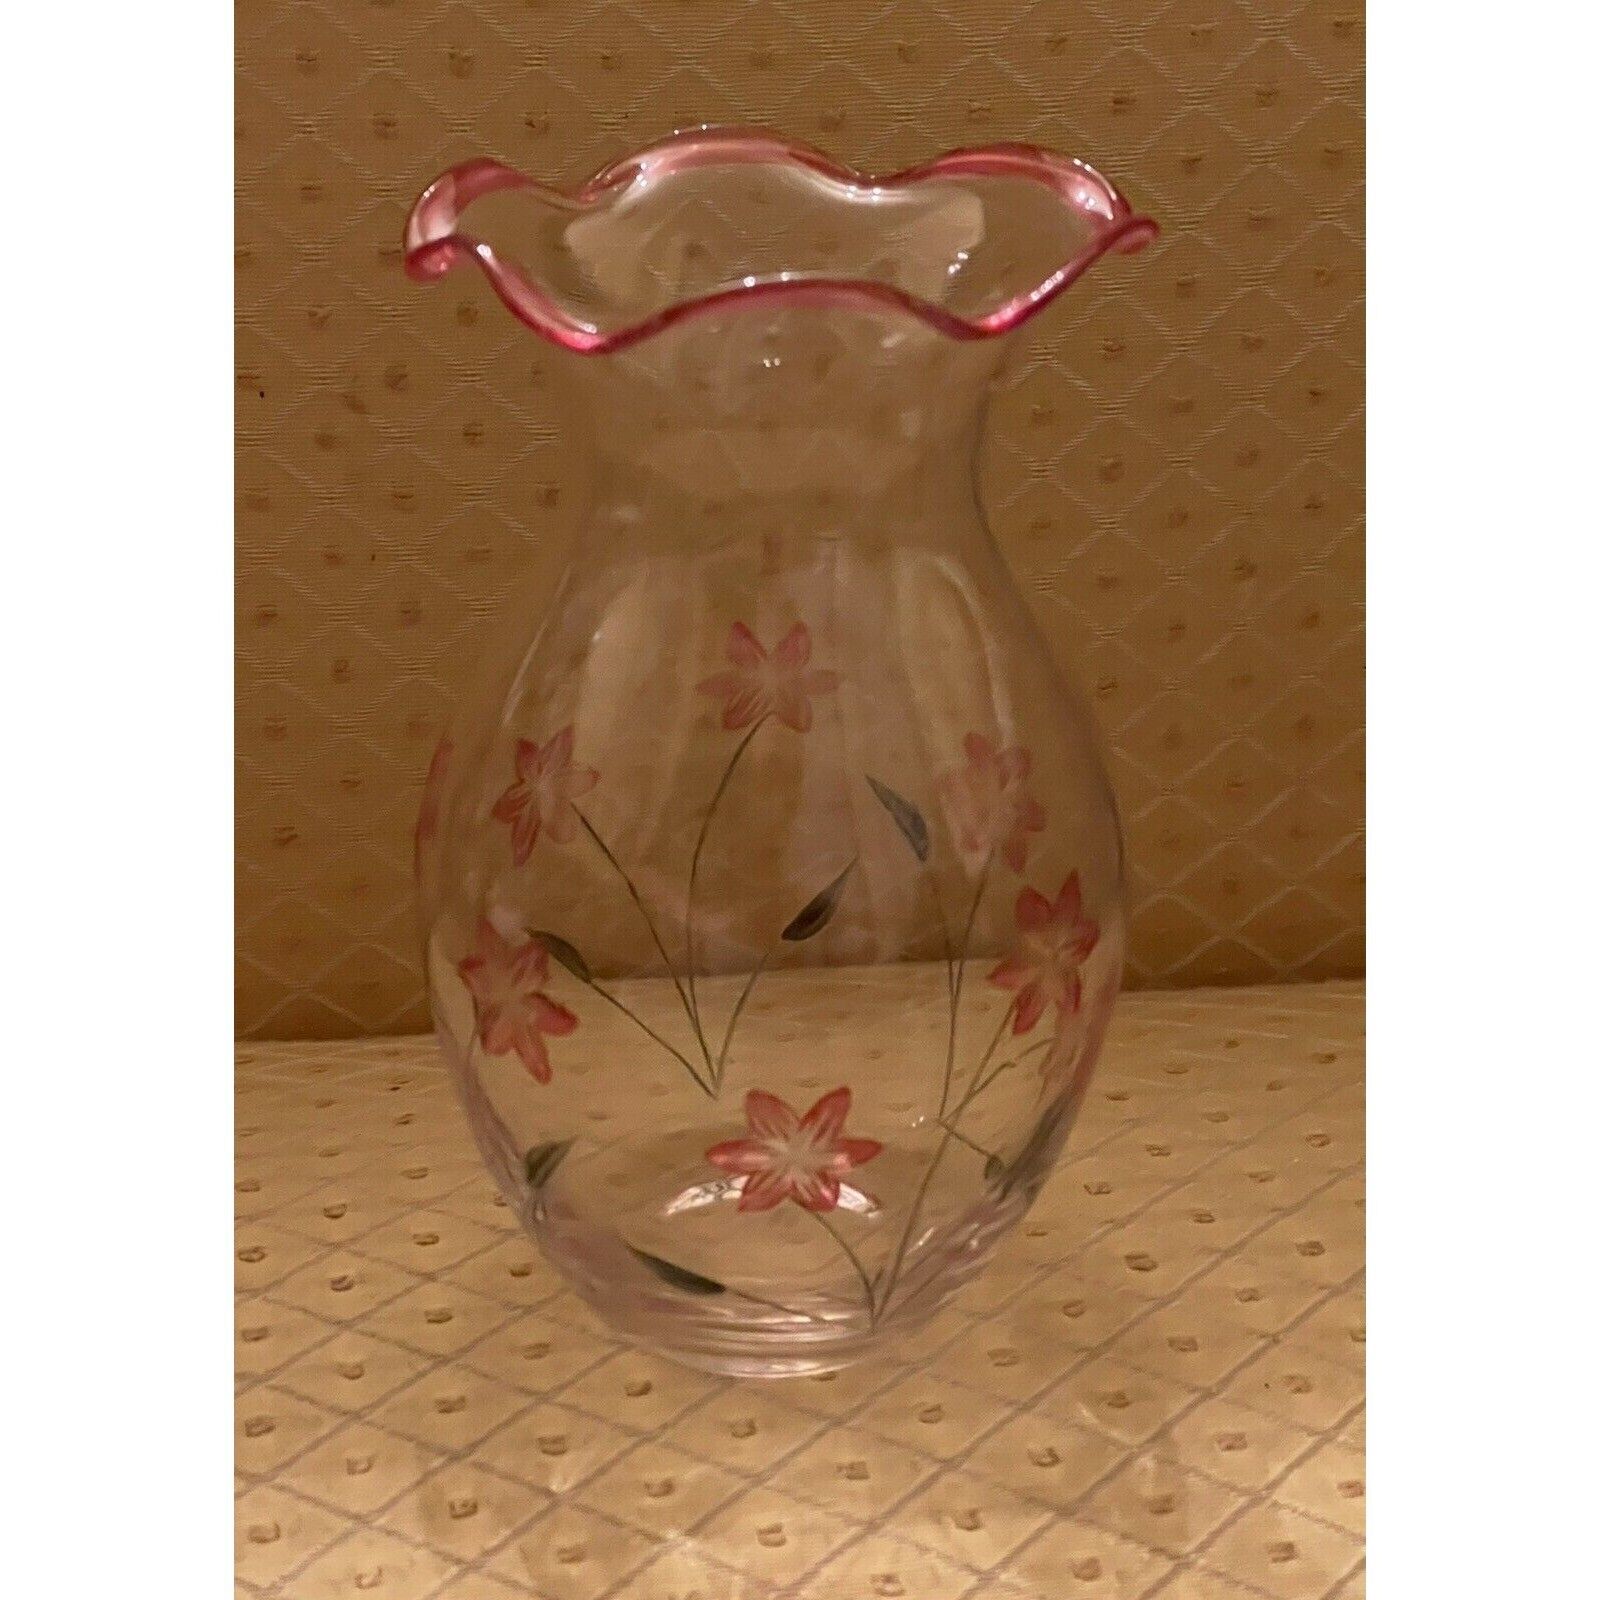 Lenox Glass Vase Floral Spirit Etched Hand Painted Ruffle Bud Pink Purple Flower